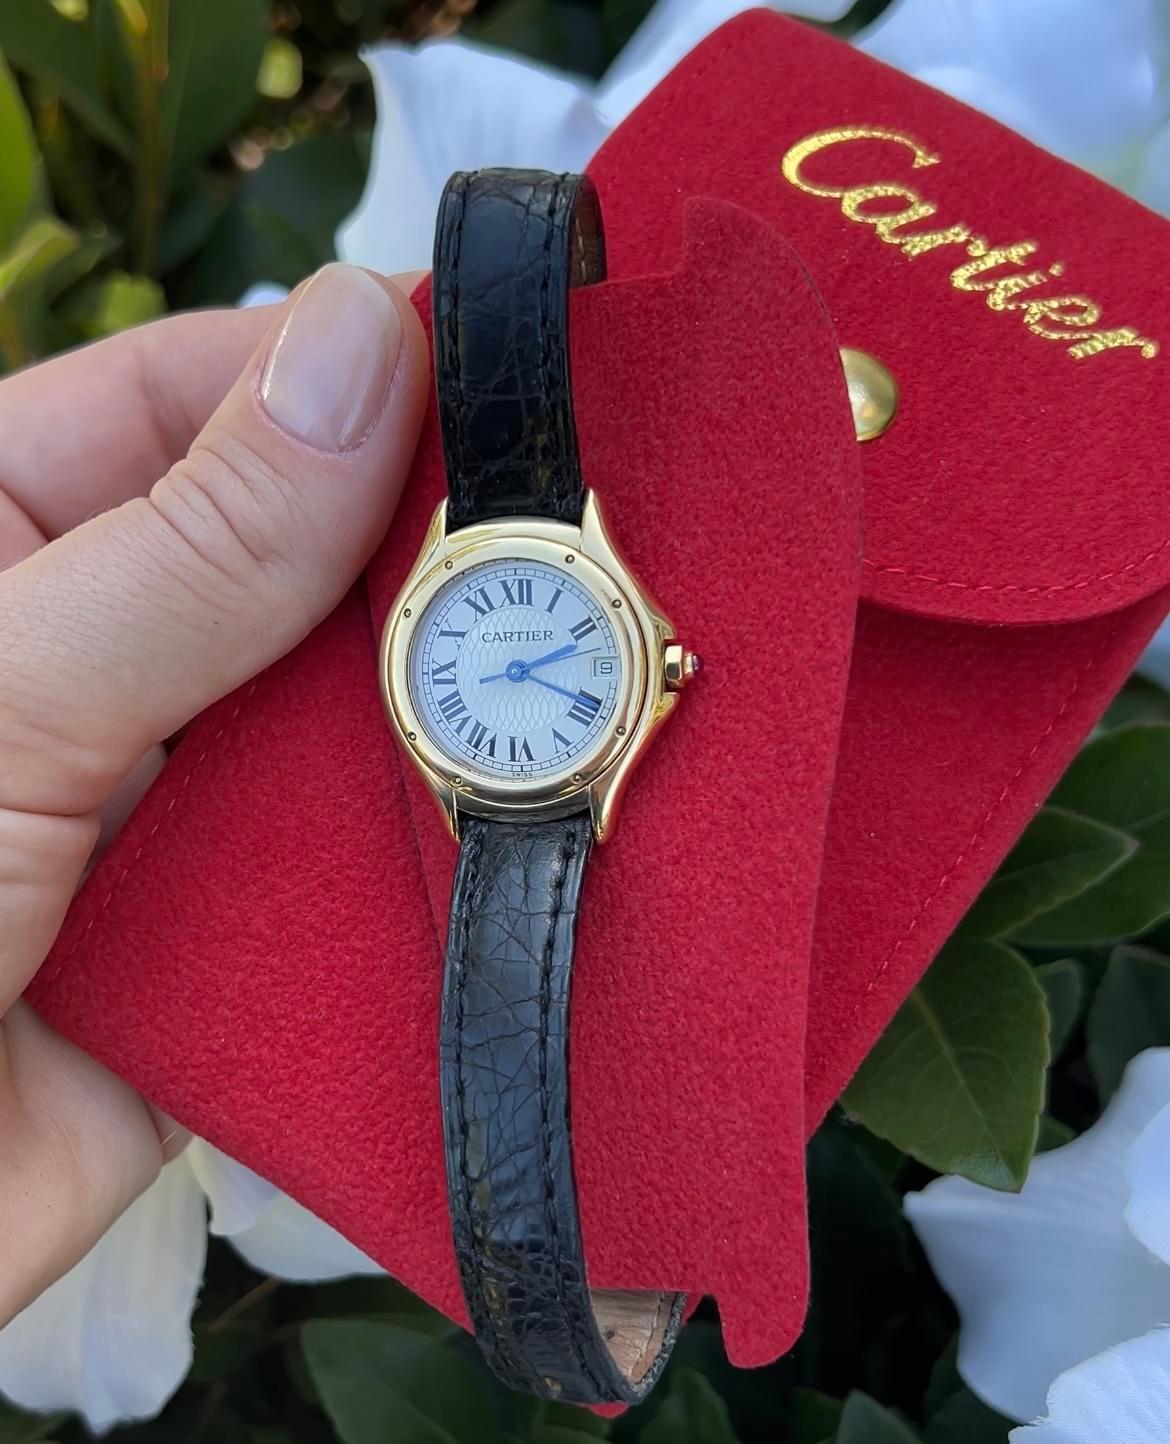 It comes with the Authenticity Certificate by GIA GG/AJP & Travel Pouch
Condition: Excellent
Brand: Cartier
Model: Panthere
Limited Edition 014/150
Reference Number: 11711
Circa 1997
Movement: Quartz
Caliber: 87.06
Case Size: 26.5 mm
Metal: 18K